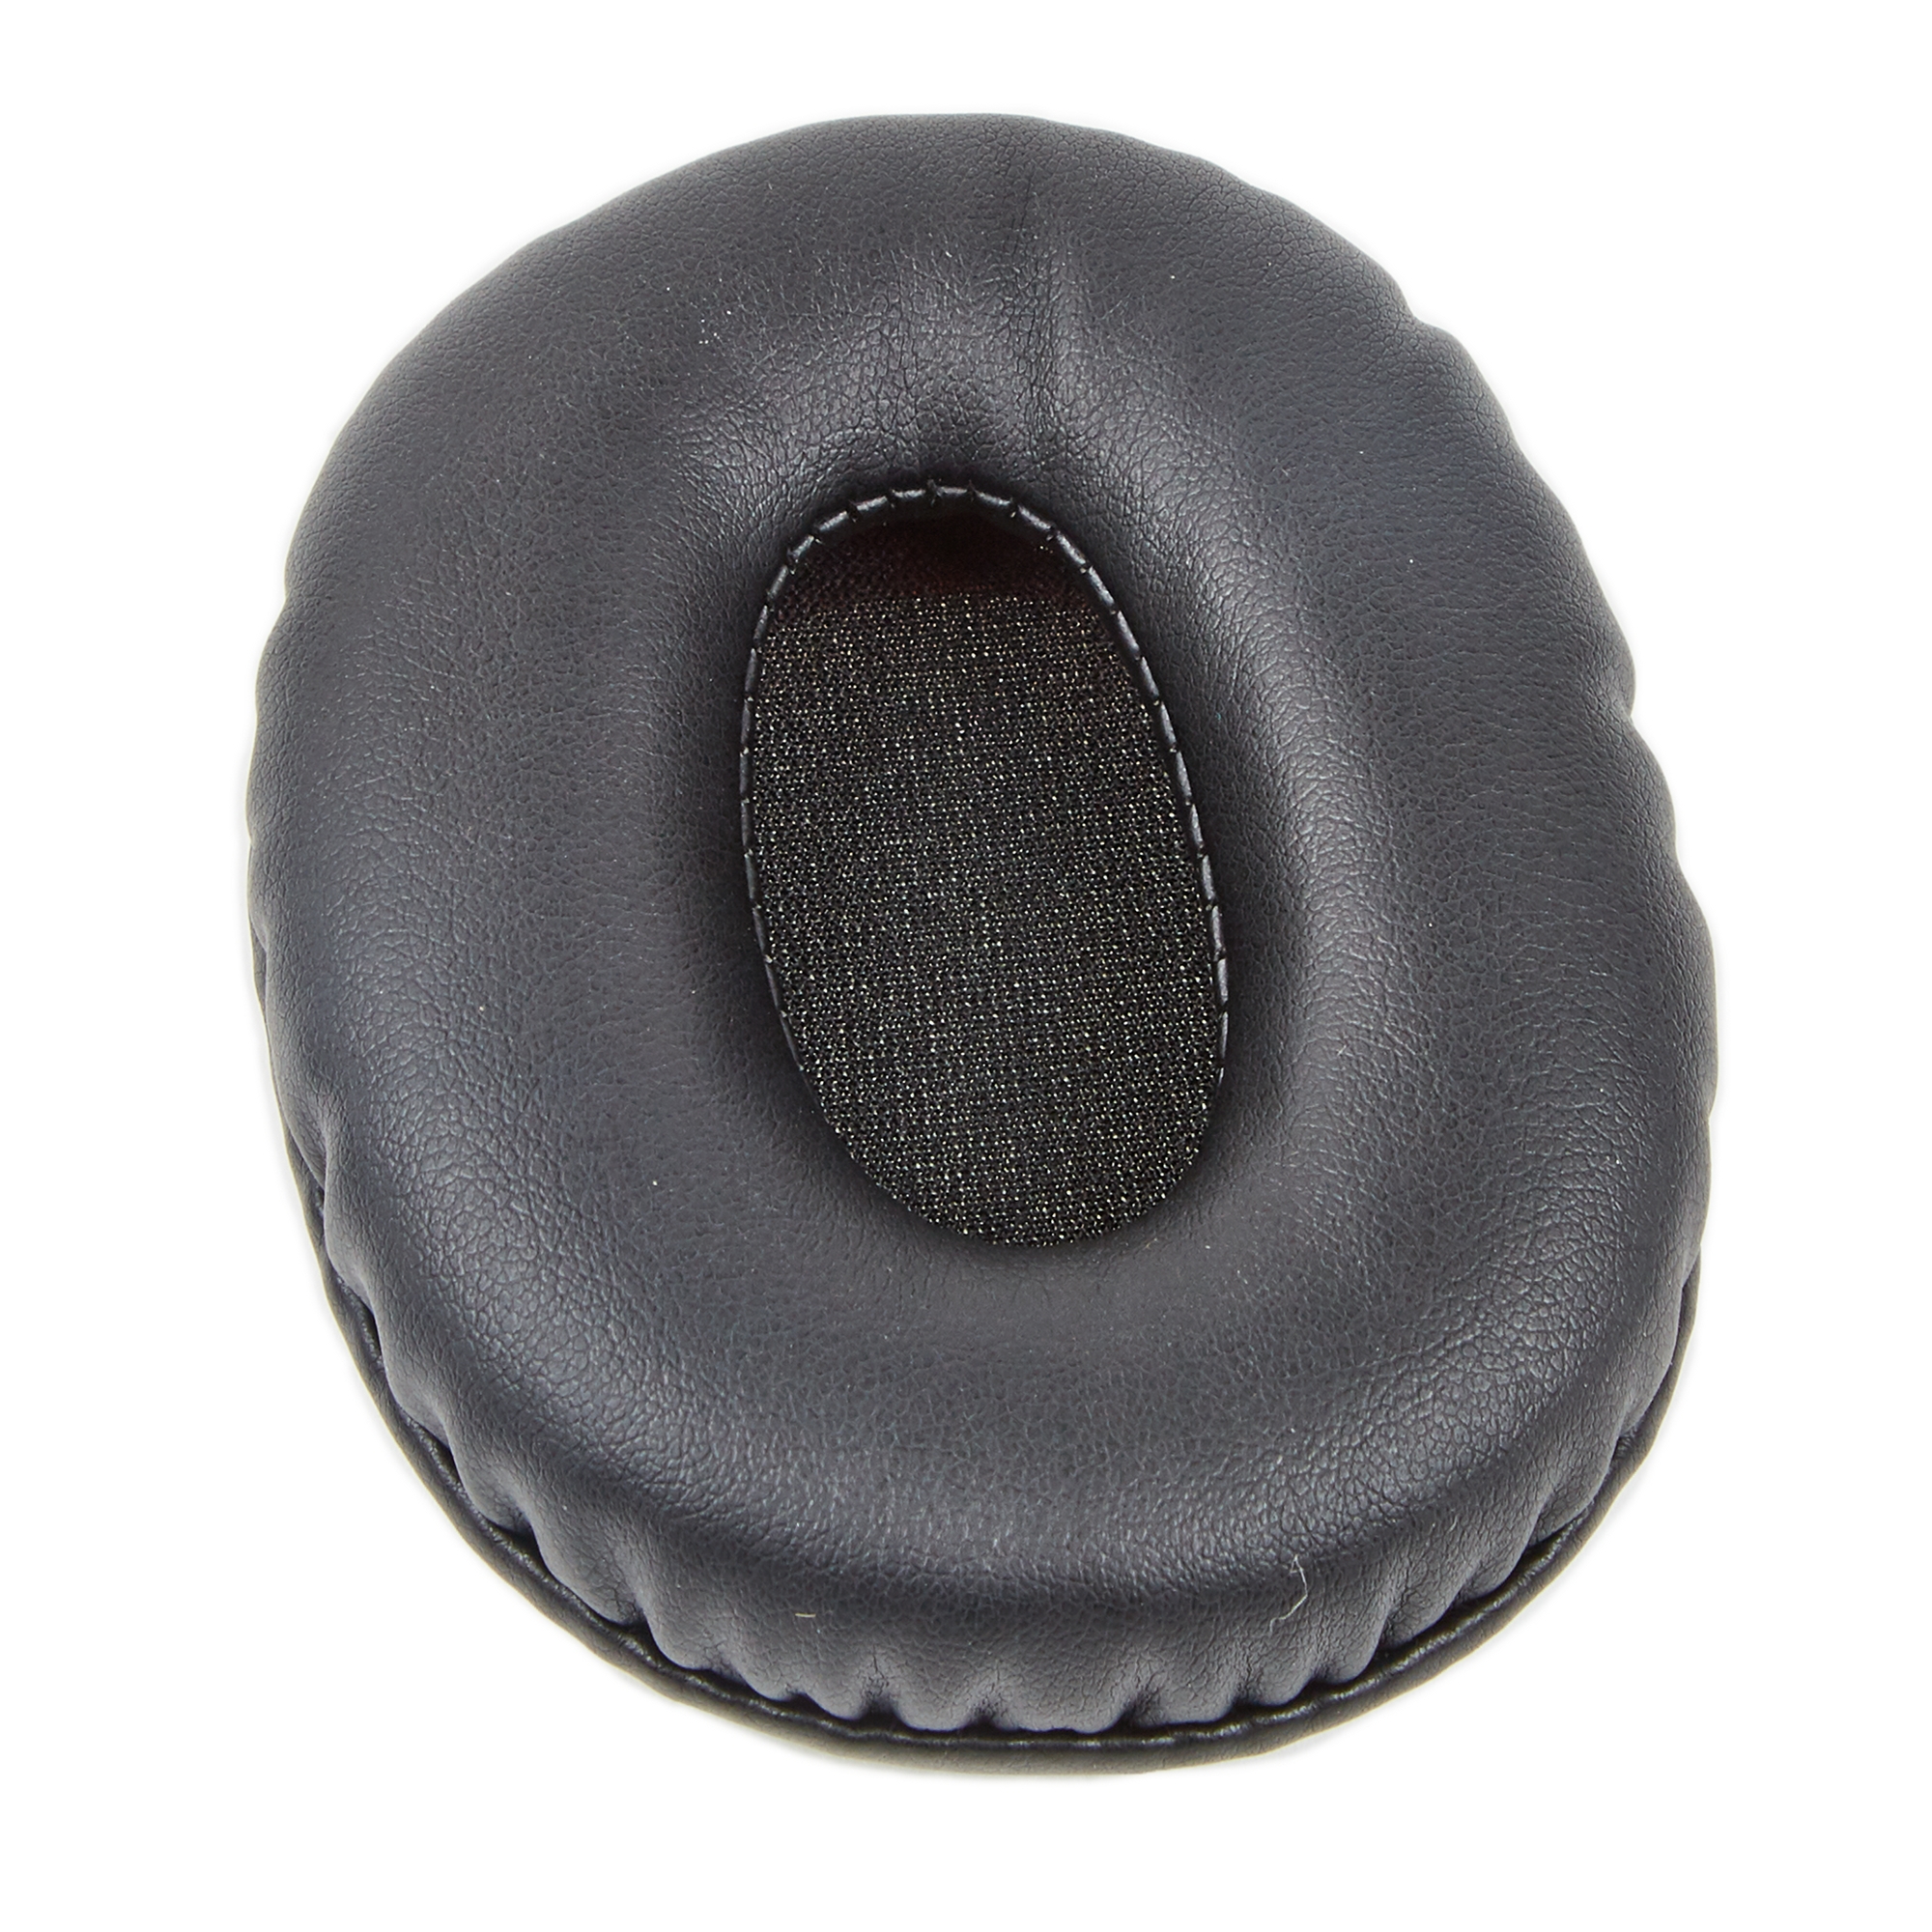 Replacement Ear Pads for Wireless Headphones-Pair